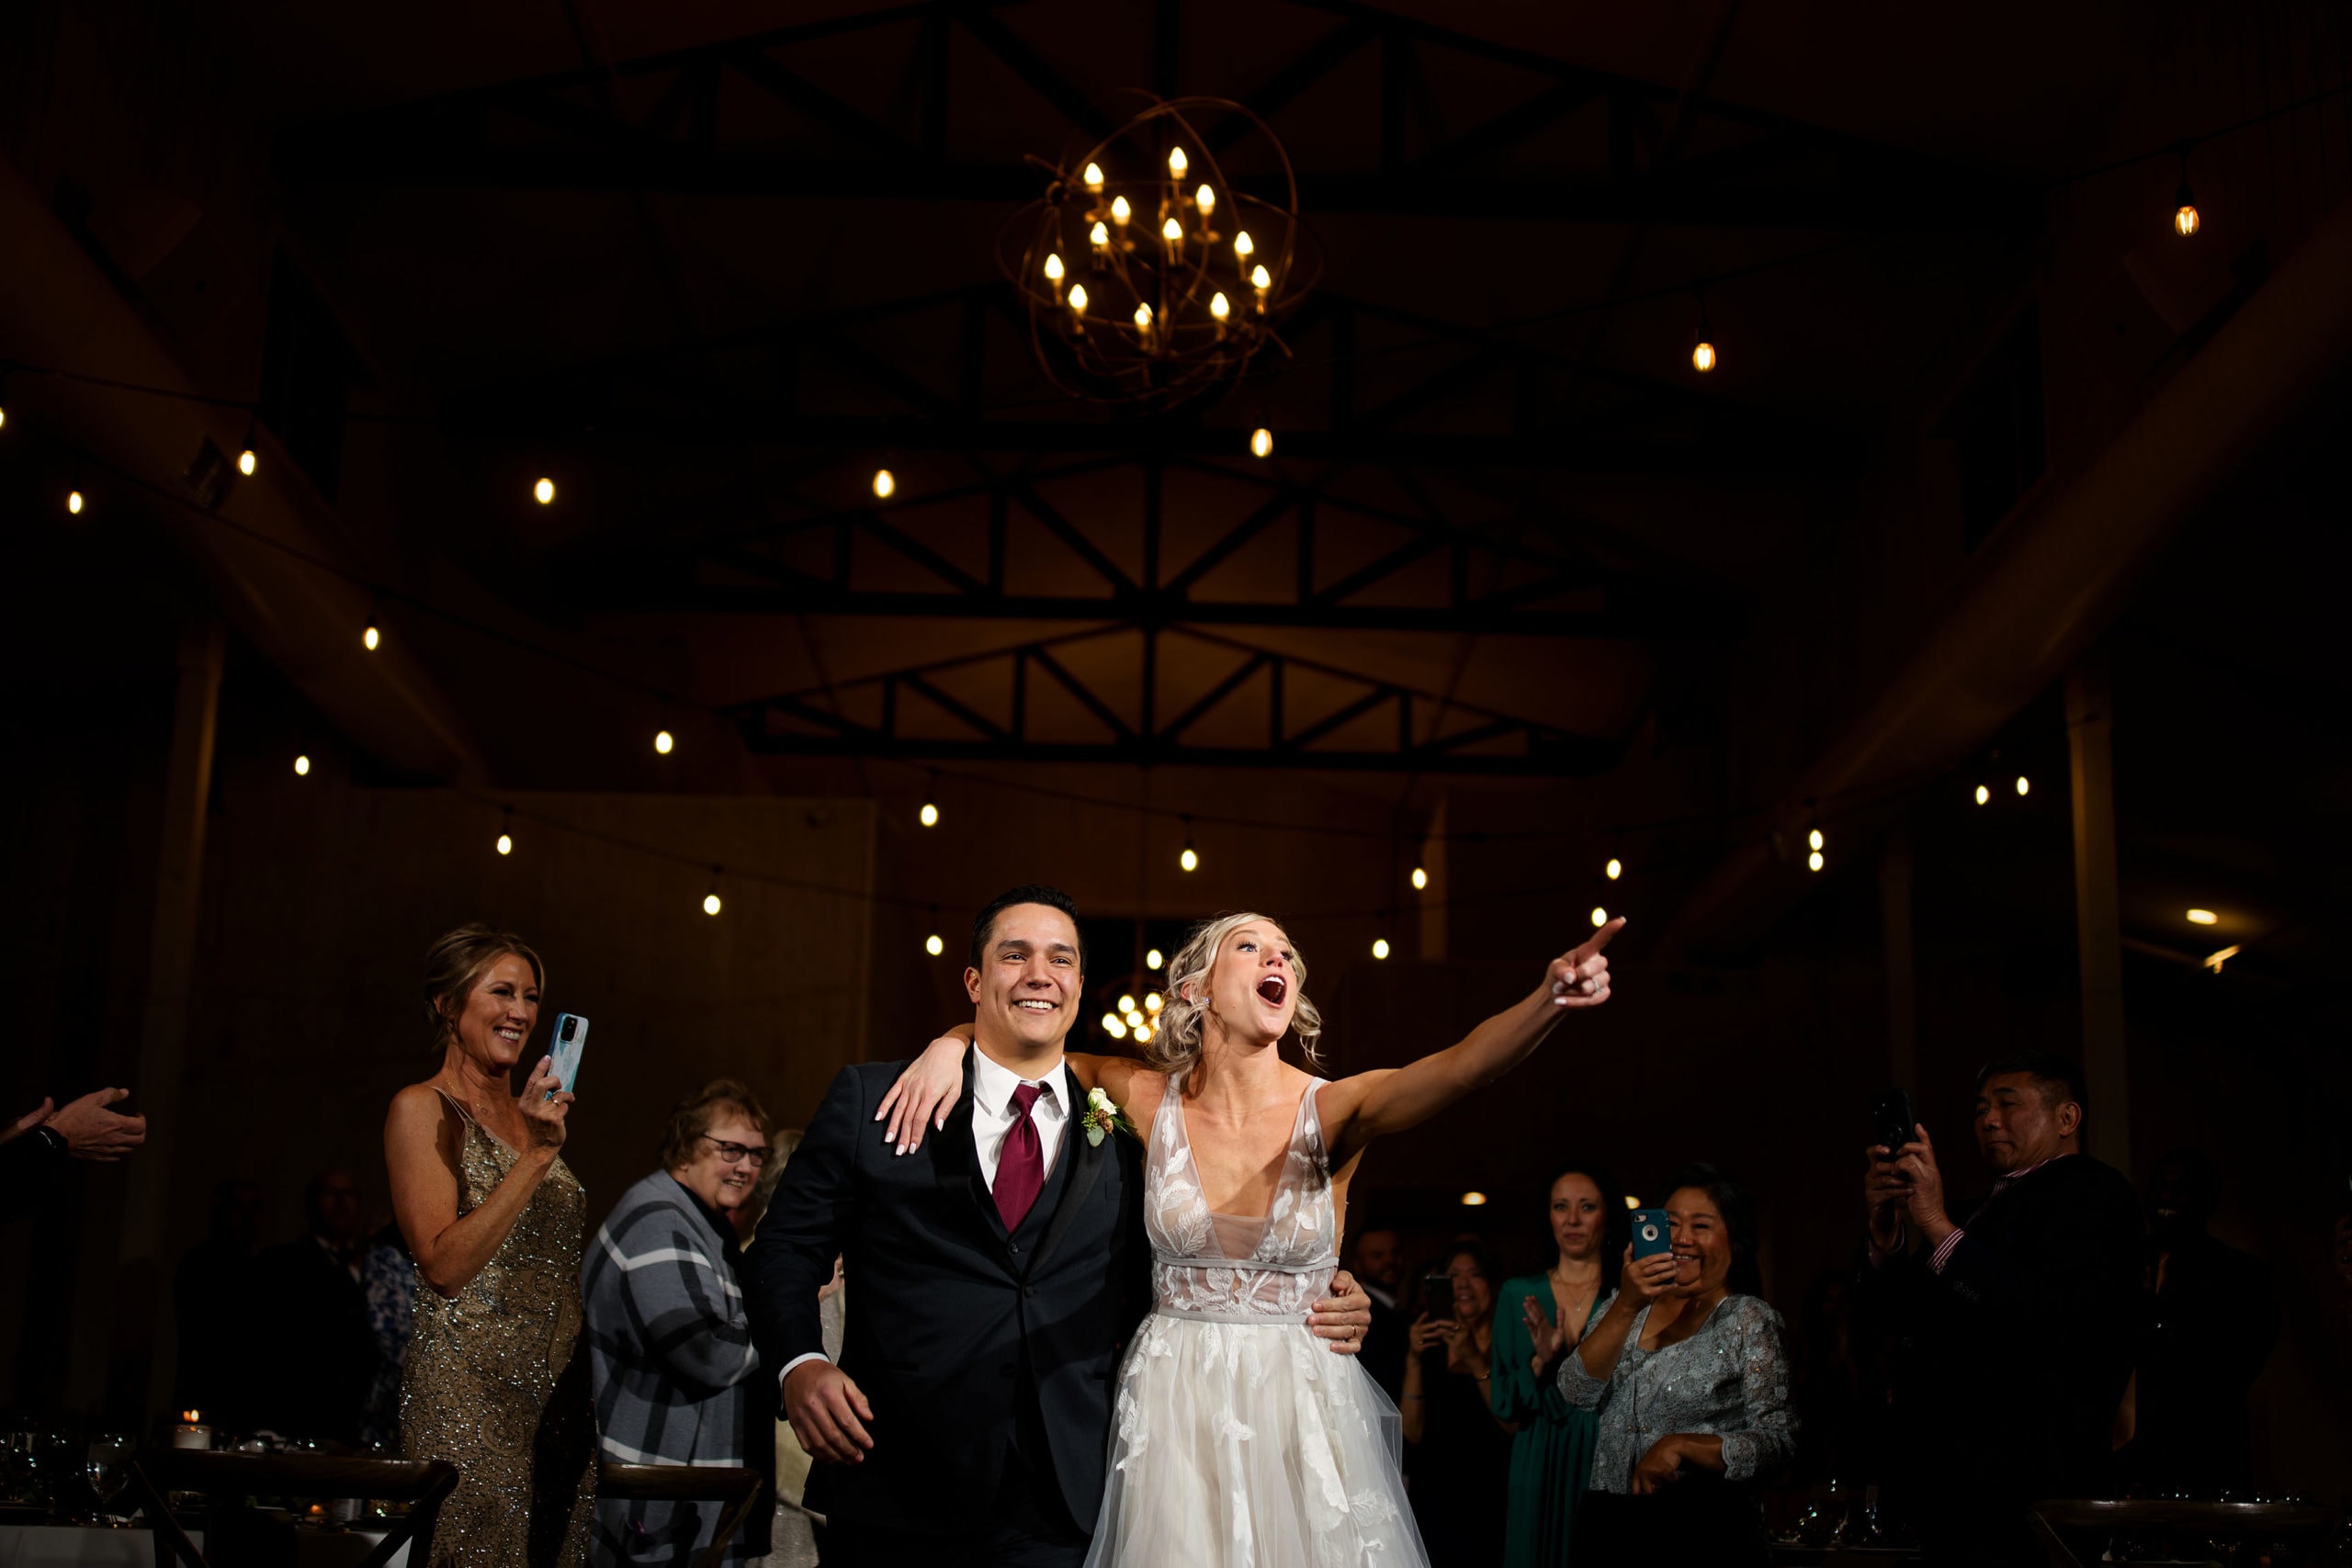 The bride and groom react during their grand entrance at Woodlands in Morrison, Colorado